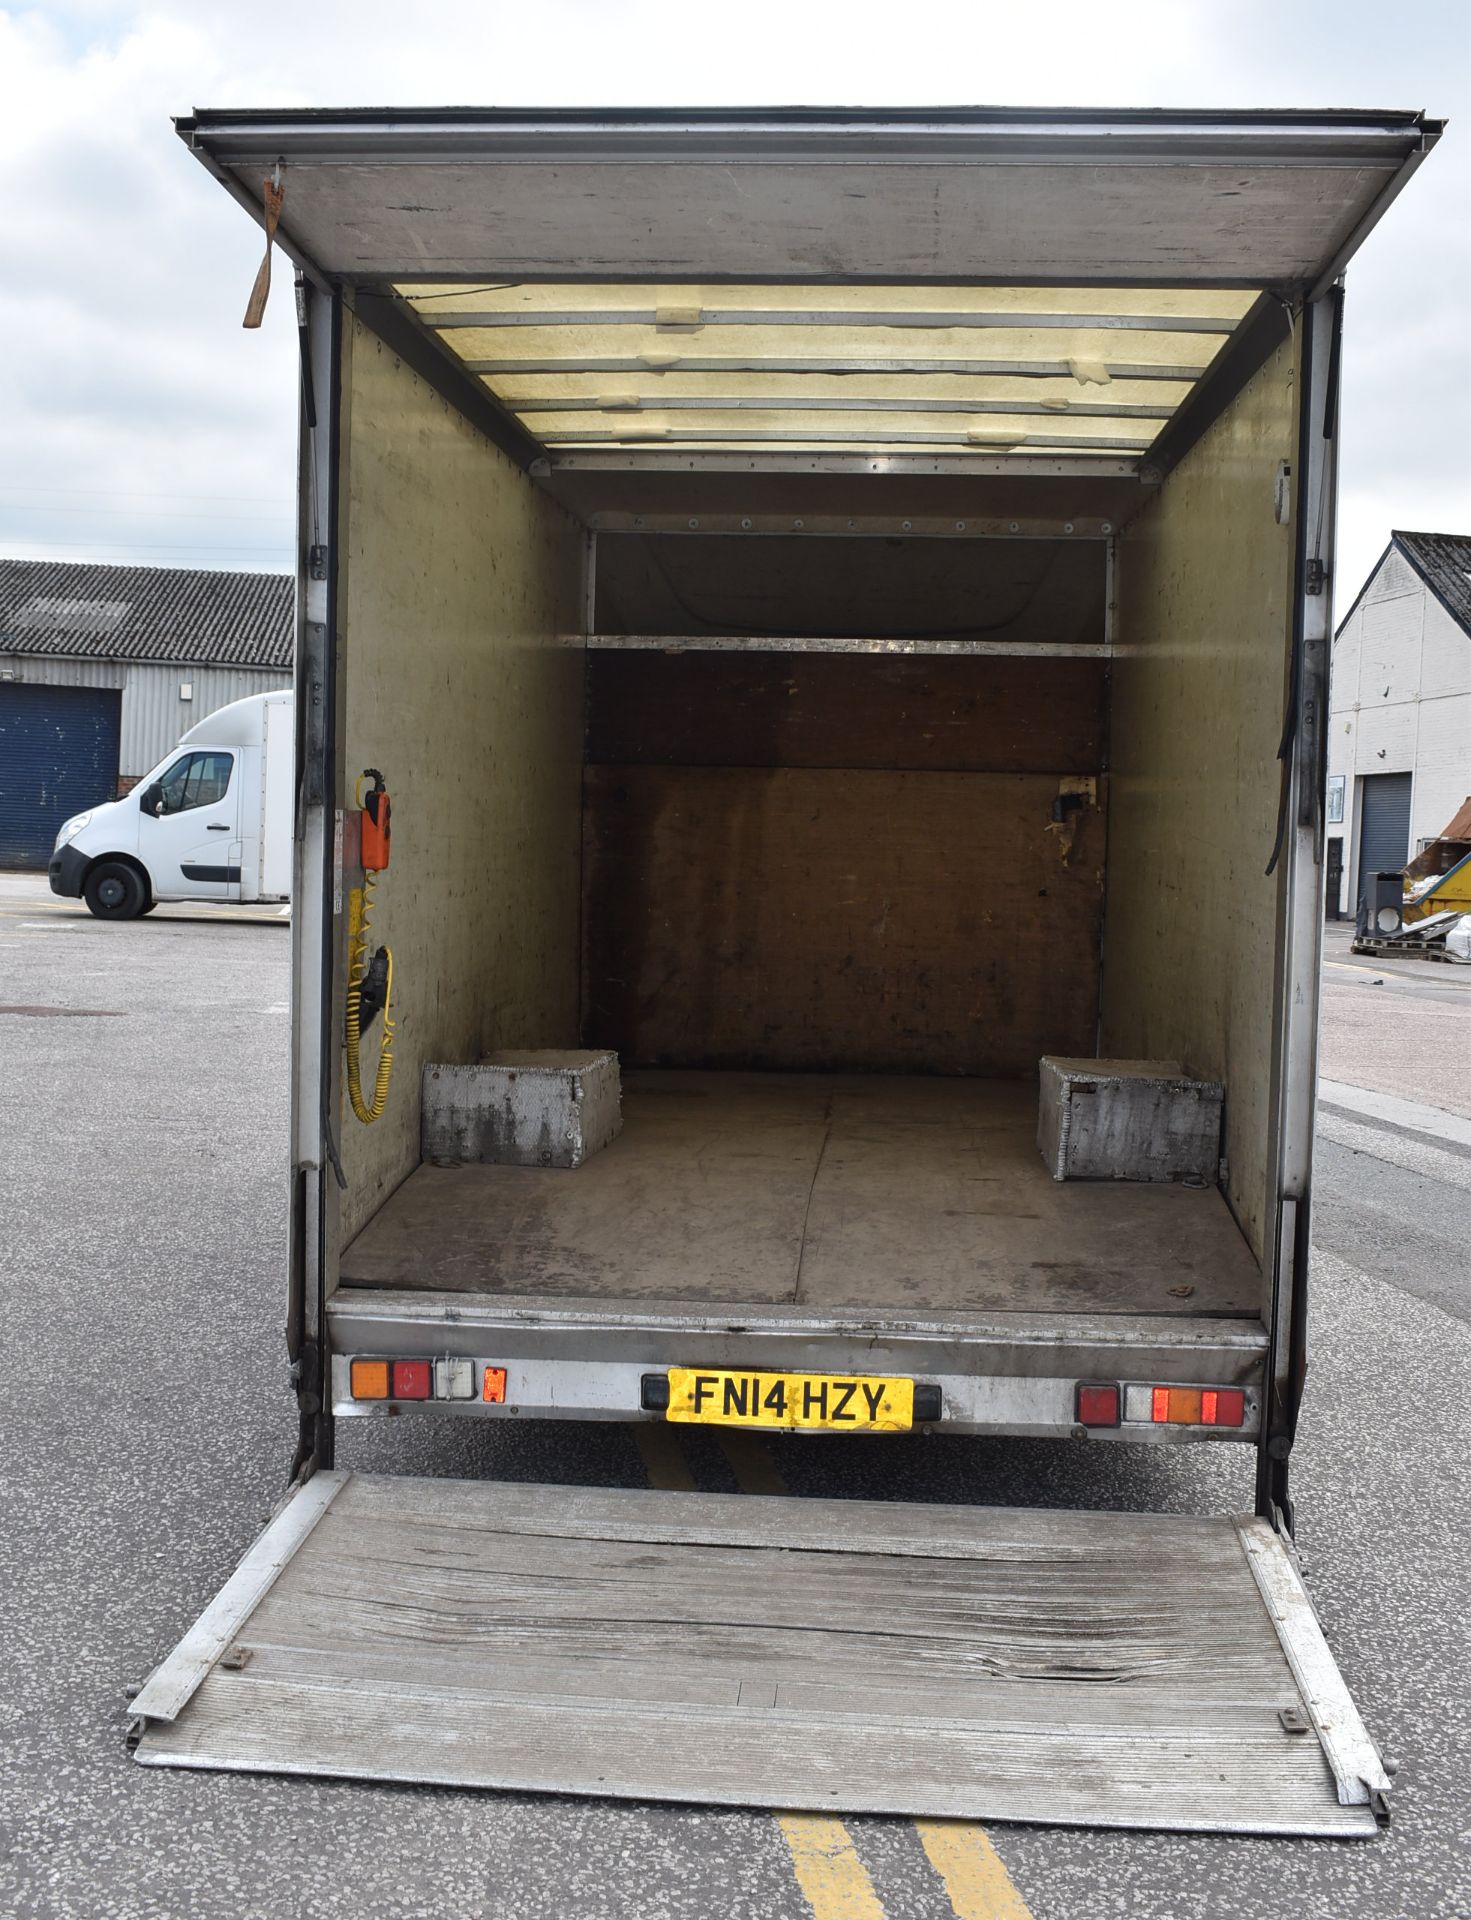 1 x Vauxhall Movano Box Van With Tail lift - 14 Plate - Includes 2 Keys - CL011 - Location: - Image 67 of 83